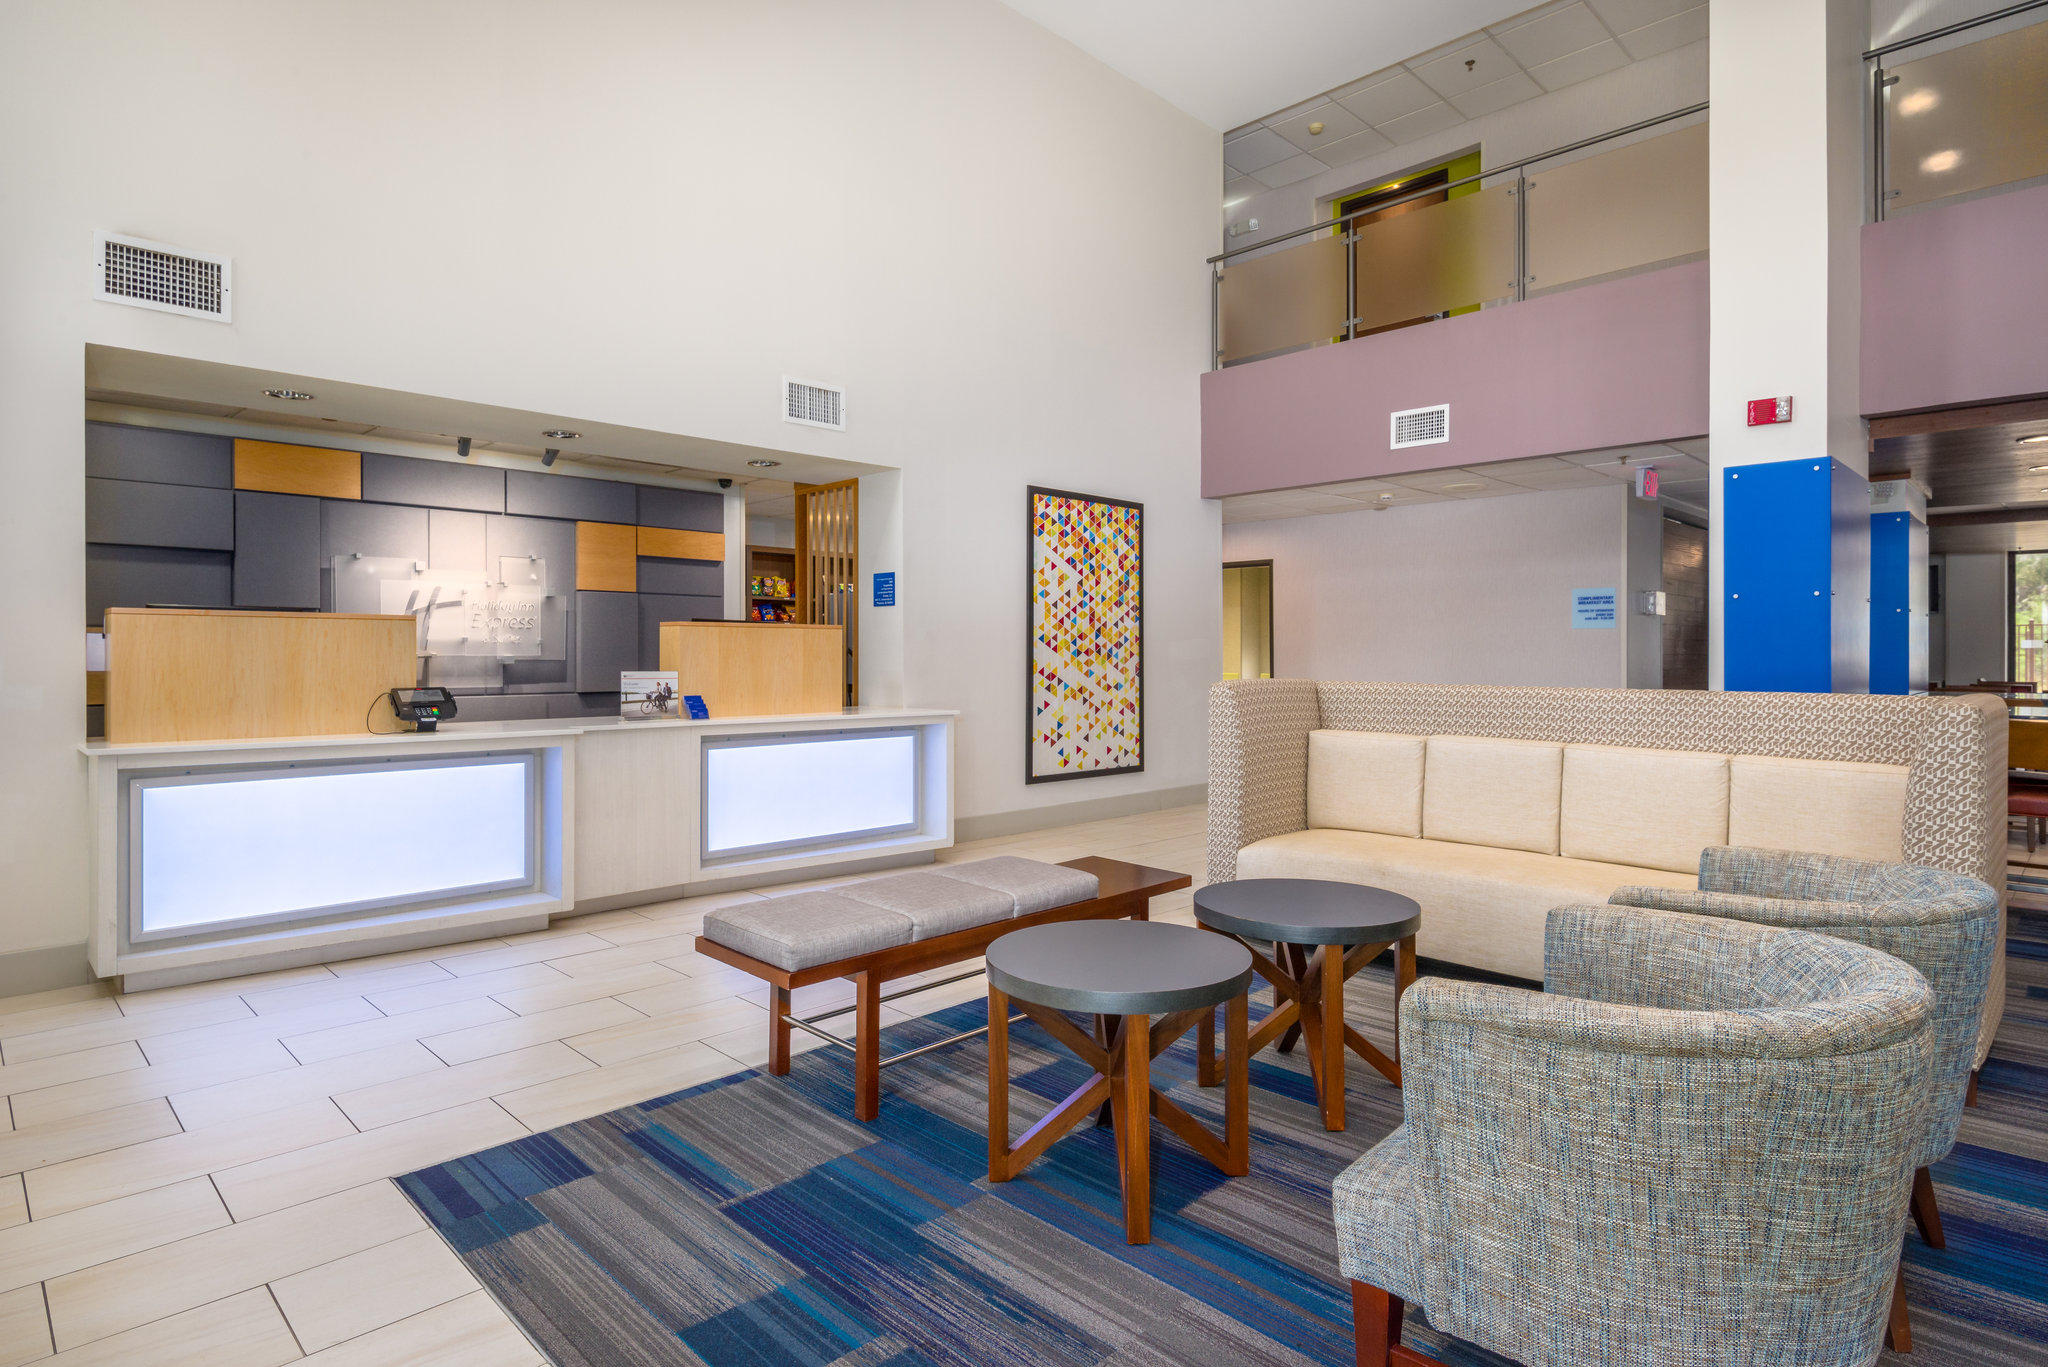 Holiday Inn Express & Suites Phoenix Airport Photo